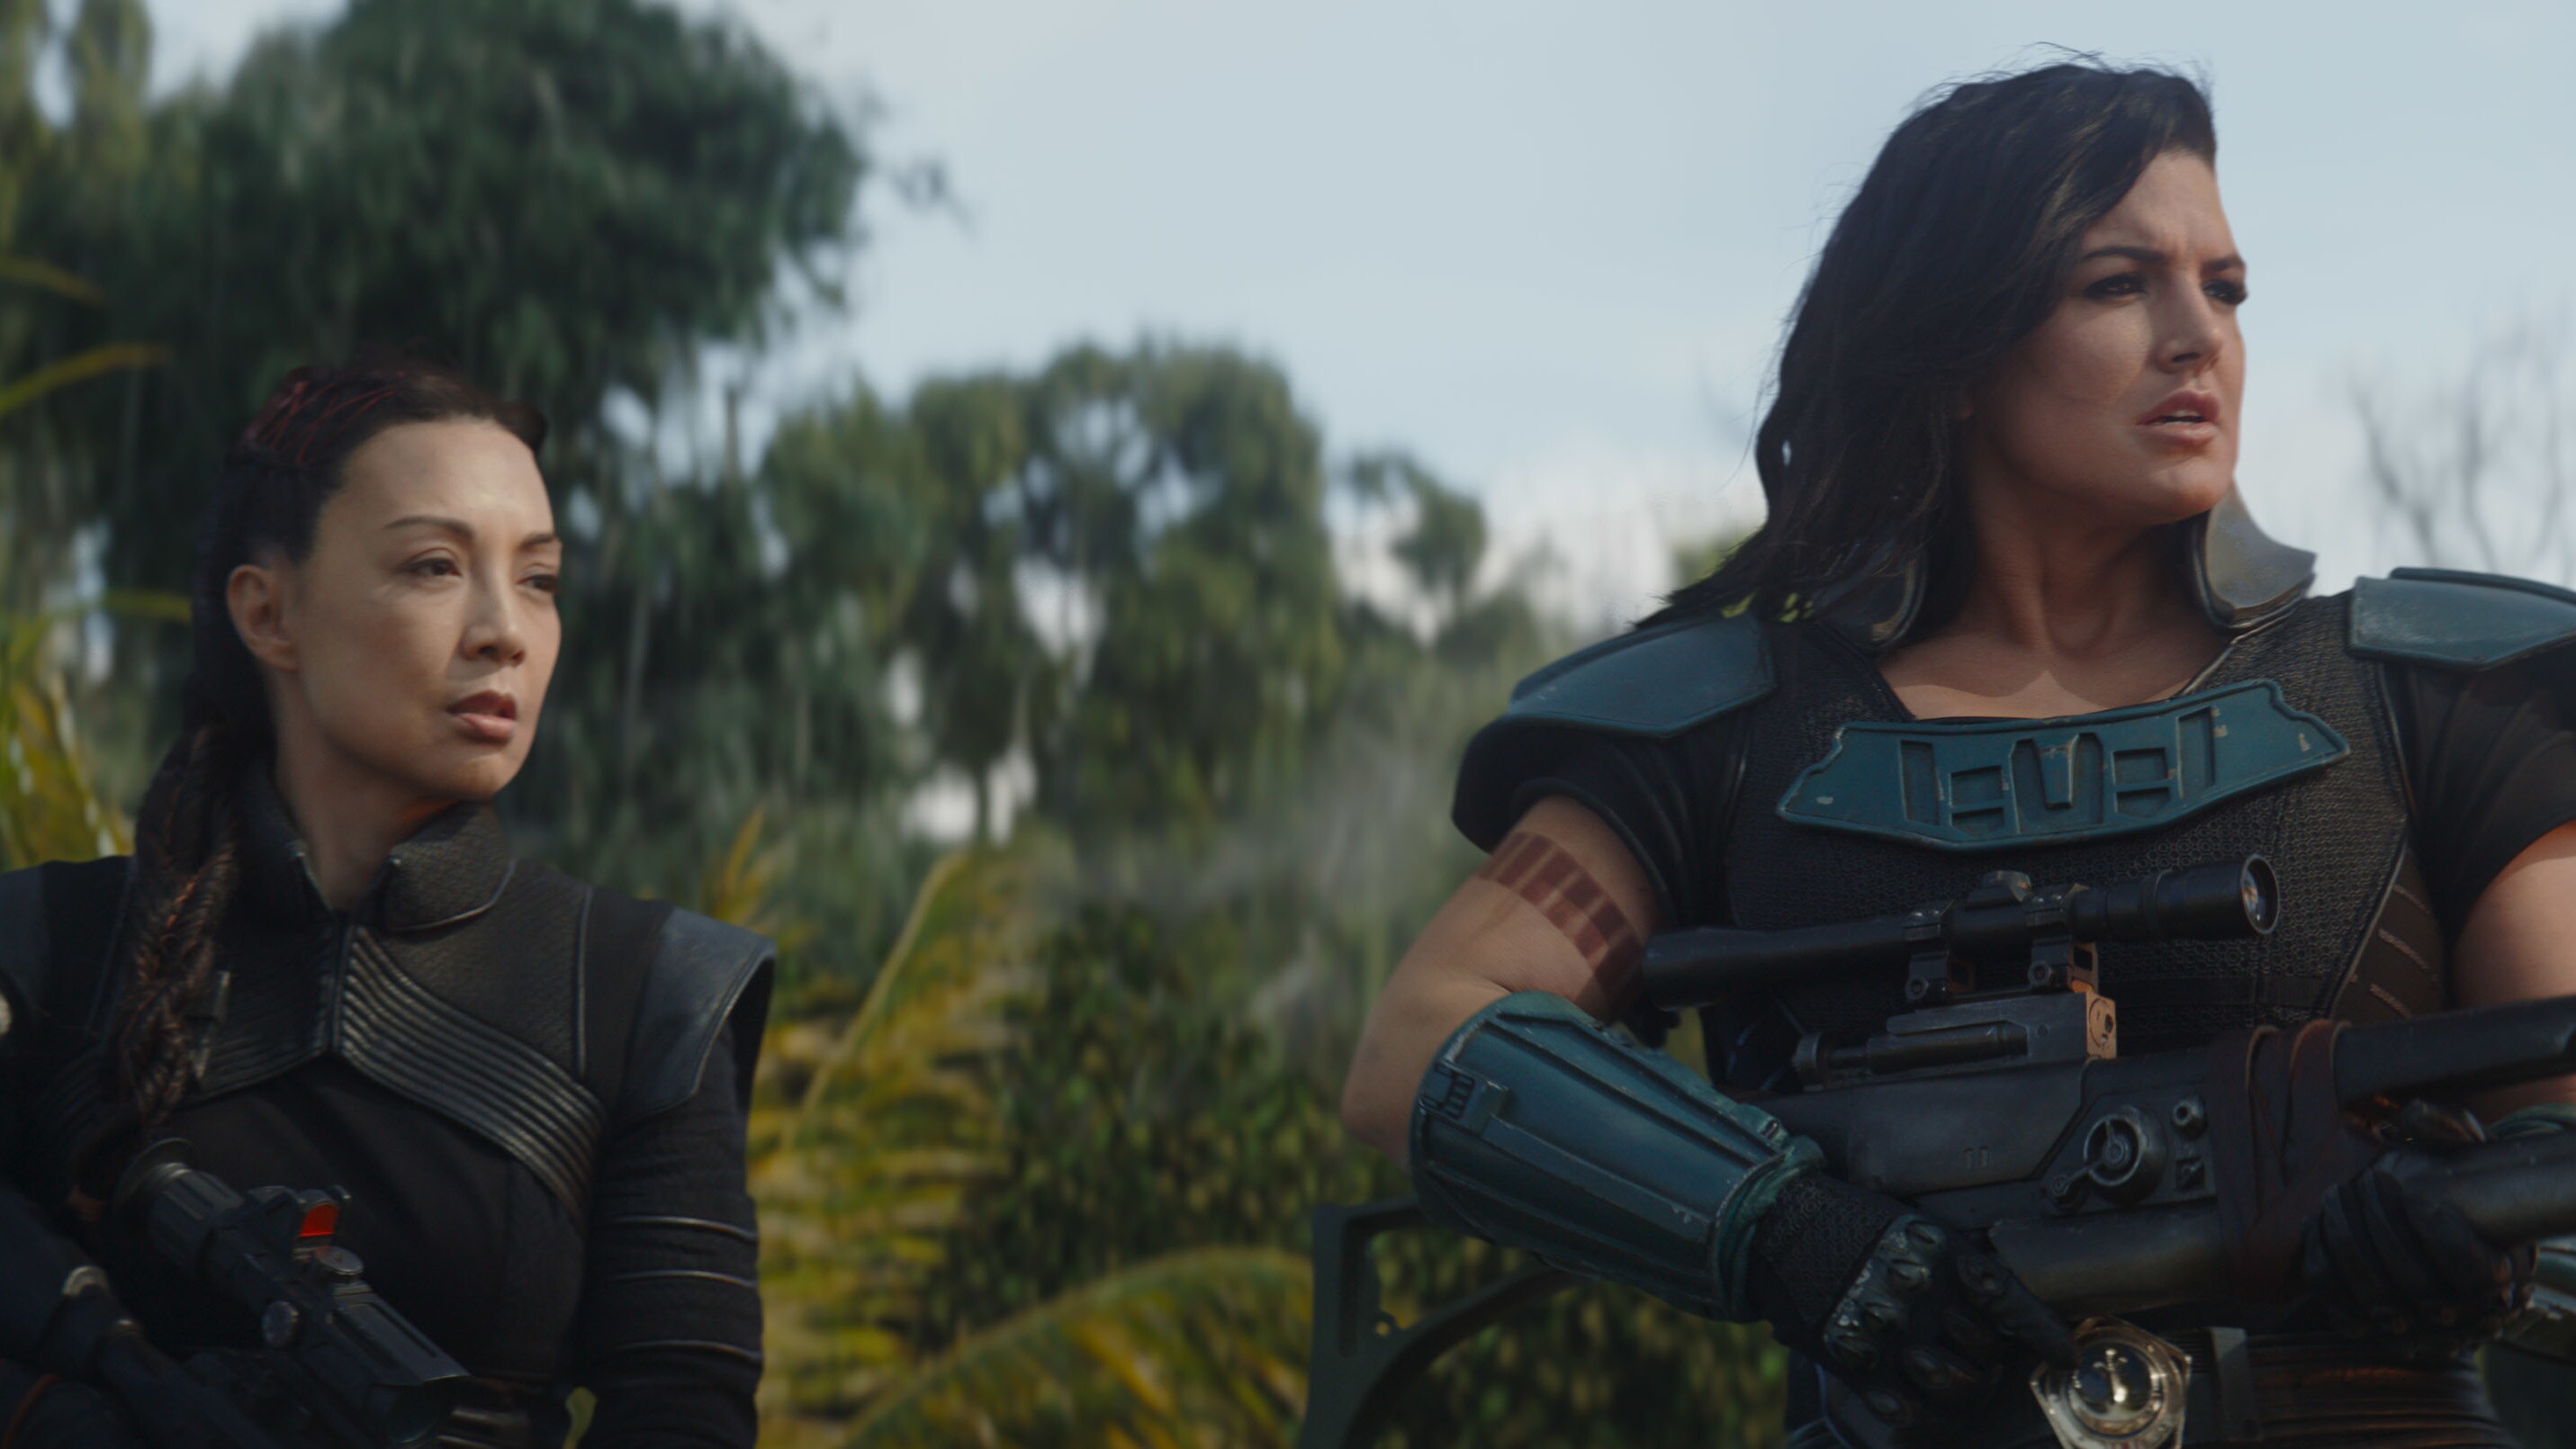 L_R): Fennec Shand (Ming-Na Wen) and Cara Dune (Gina Carano) in Lucasfilm's THE MANDALORIAN, season two, exclusively on Disney+. © 2020 Lucasfilm Ltd. & ™. All Rights Reserved.